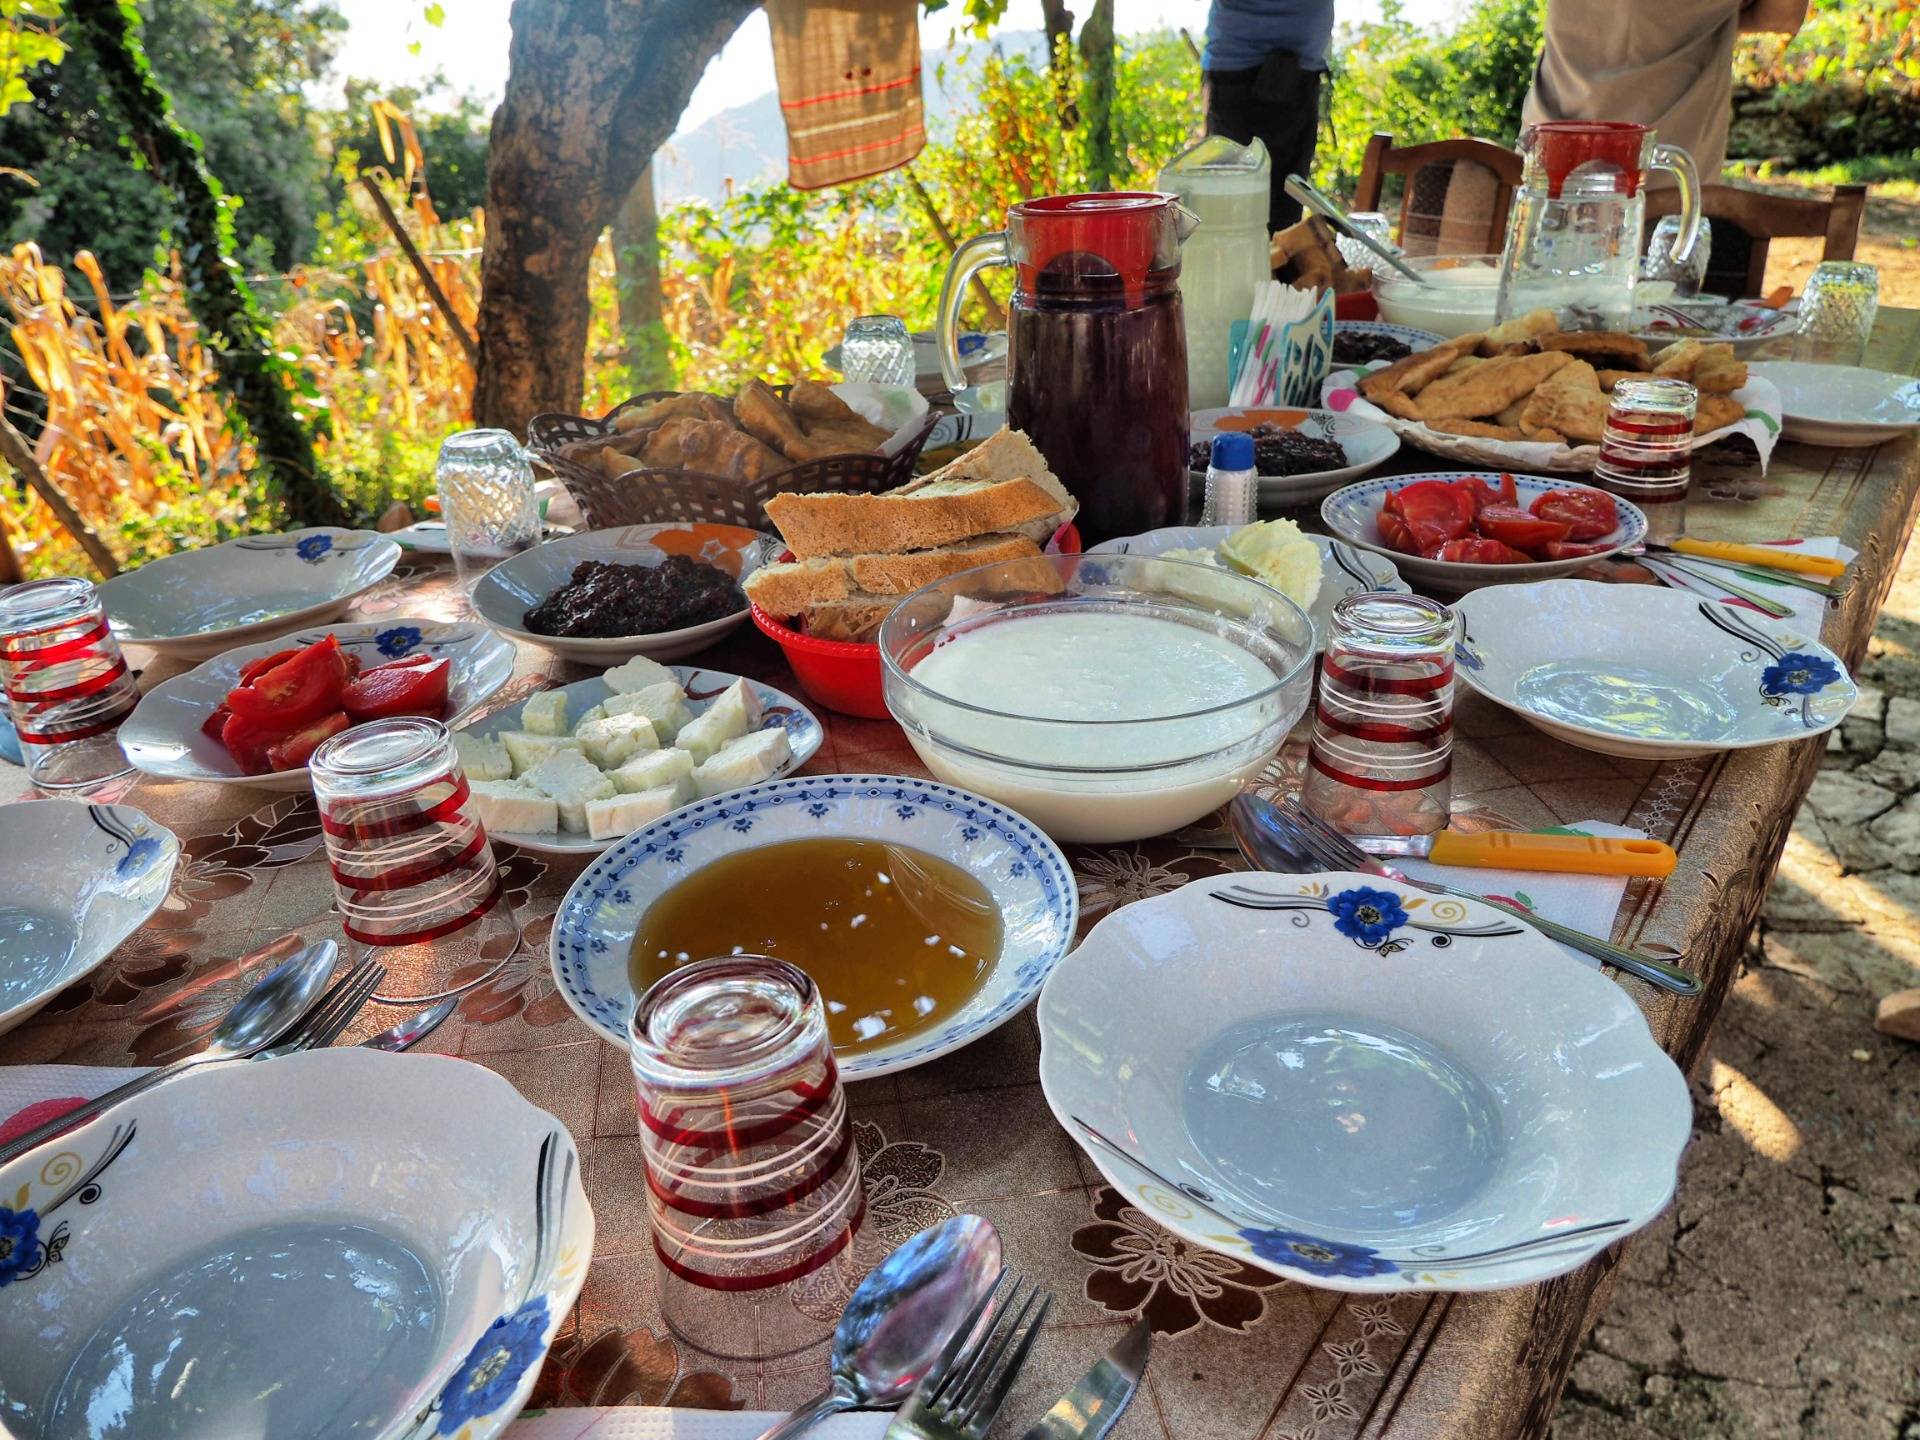 Eating in Albania: Dreams of fabulous dishes